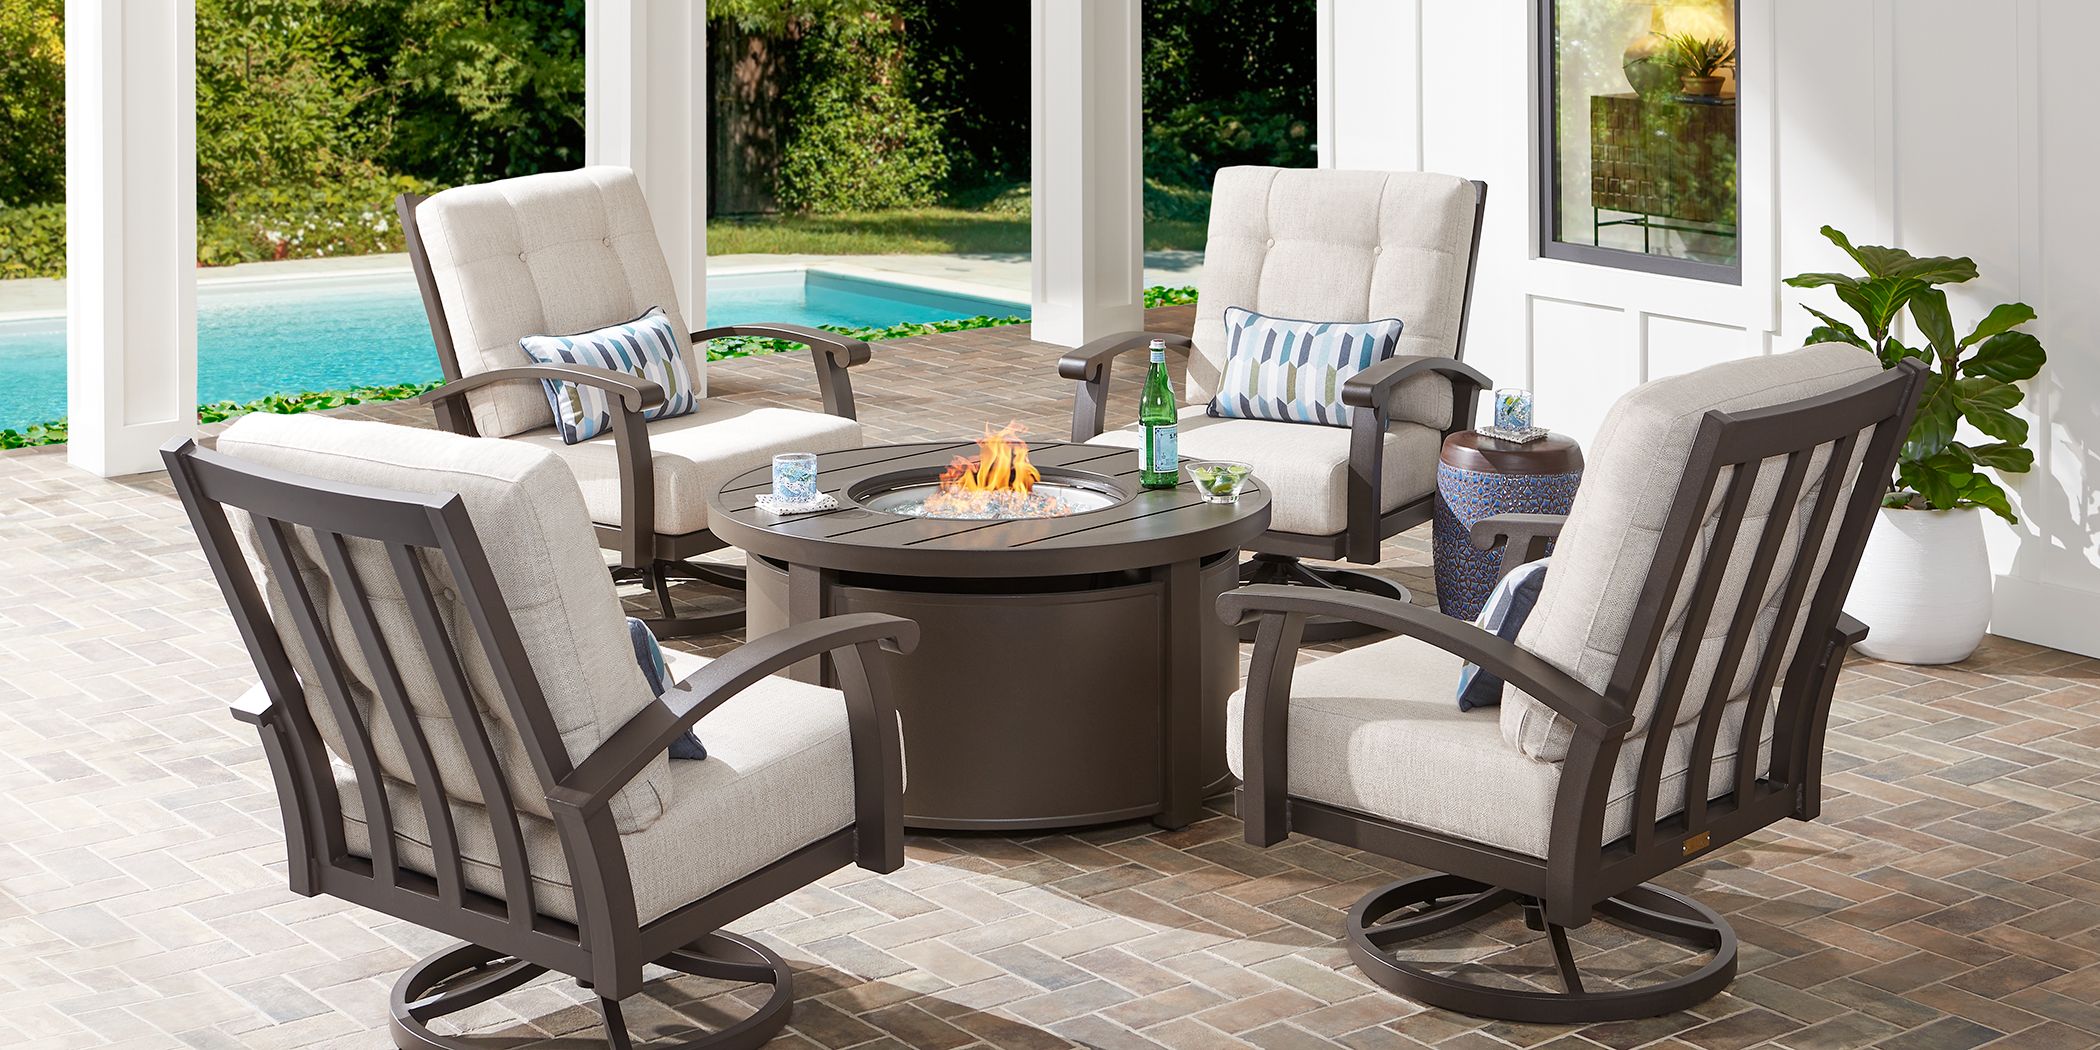 Fire Pit Seating Set With Swivel Chairs, Fire Pit Set With Chairs